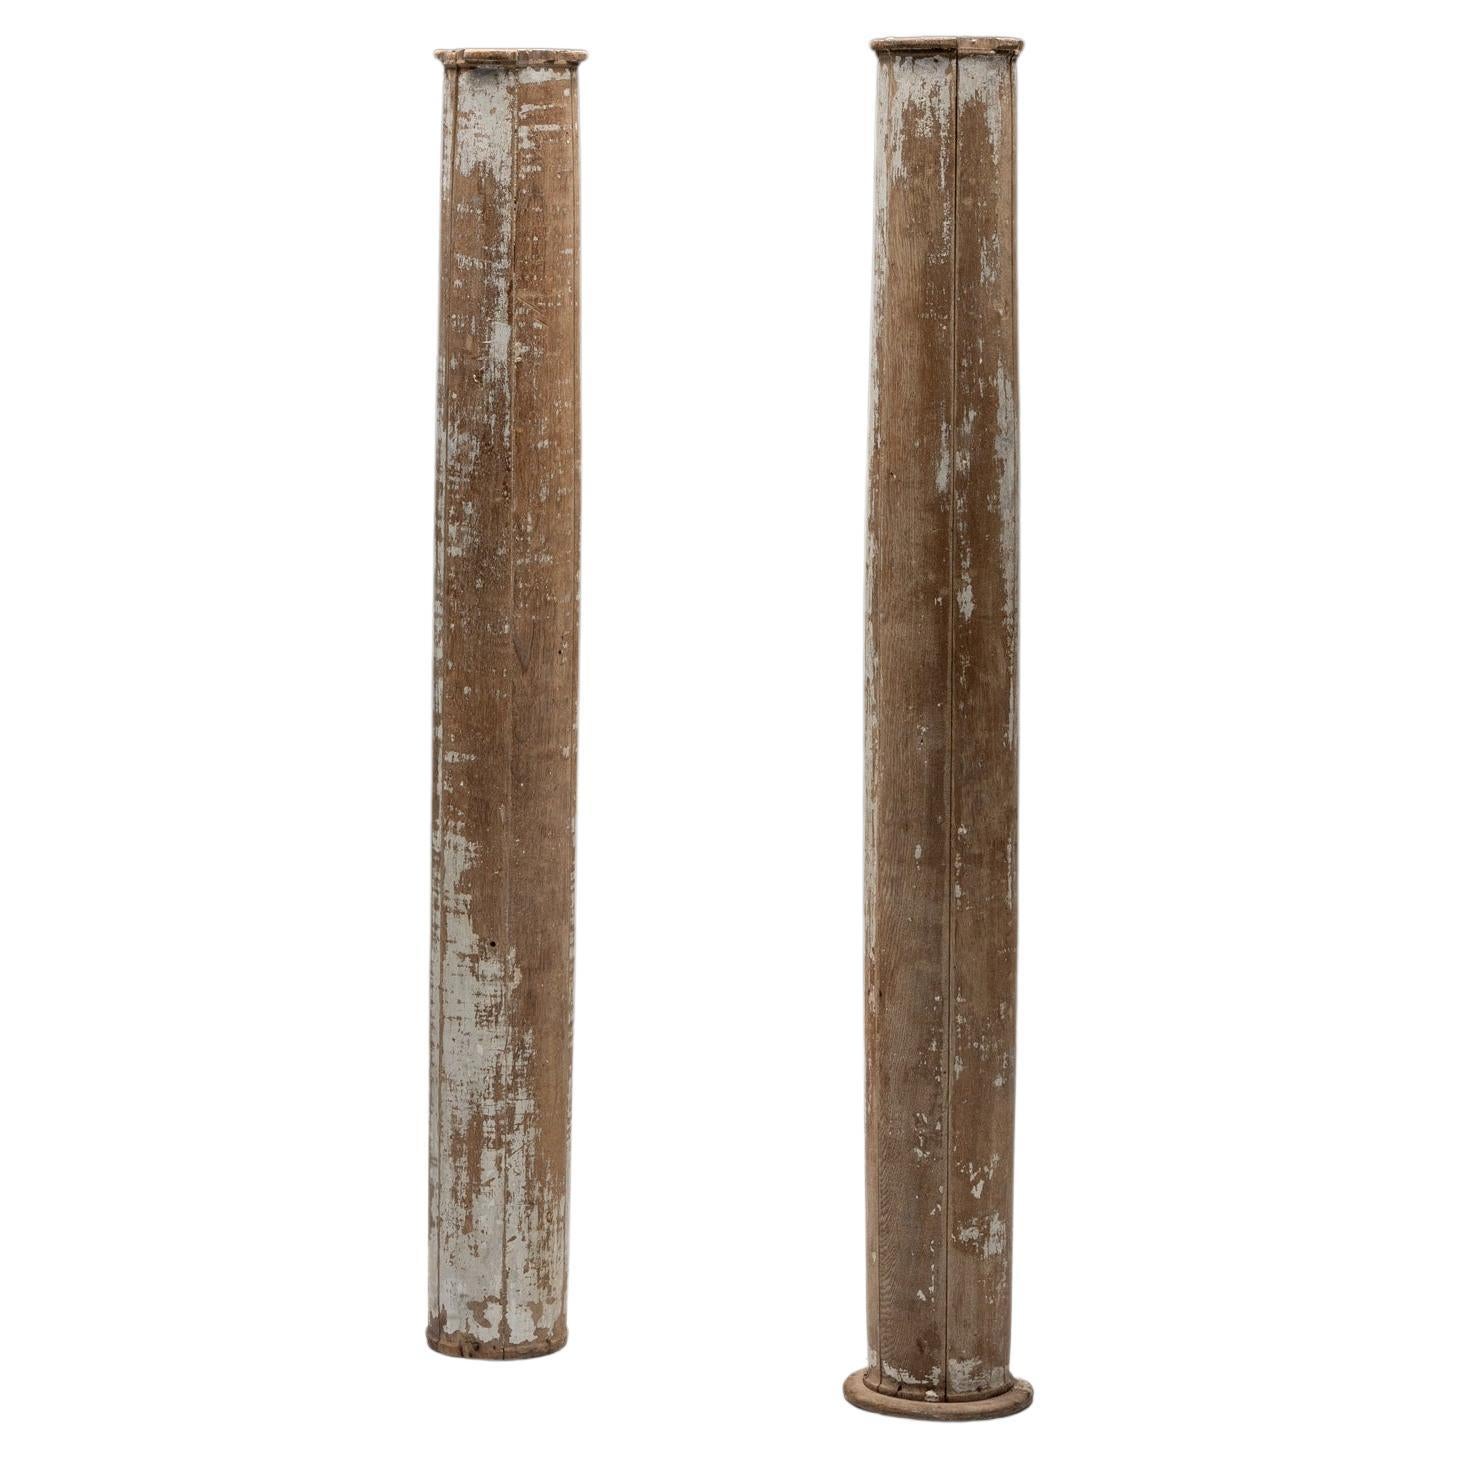 Pair of Partly Patinated Wooden Columns, 19th Century